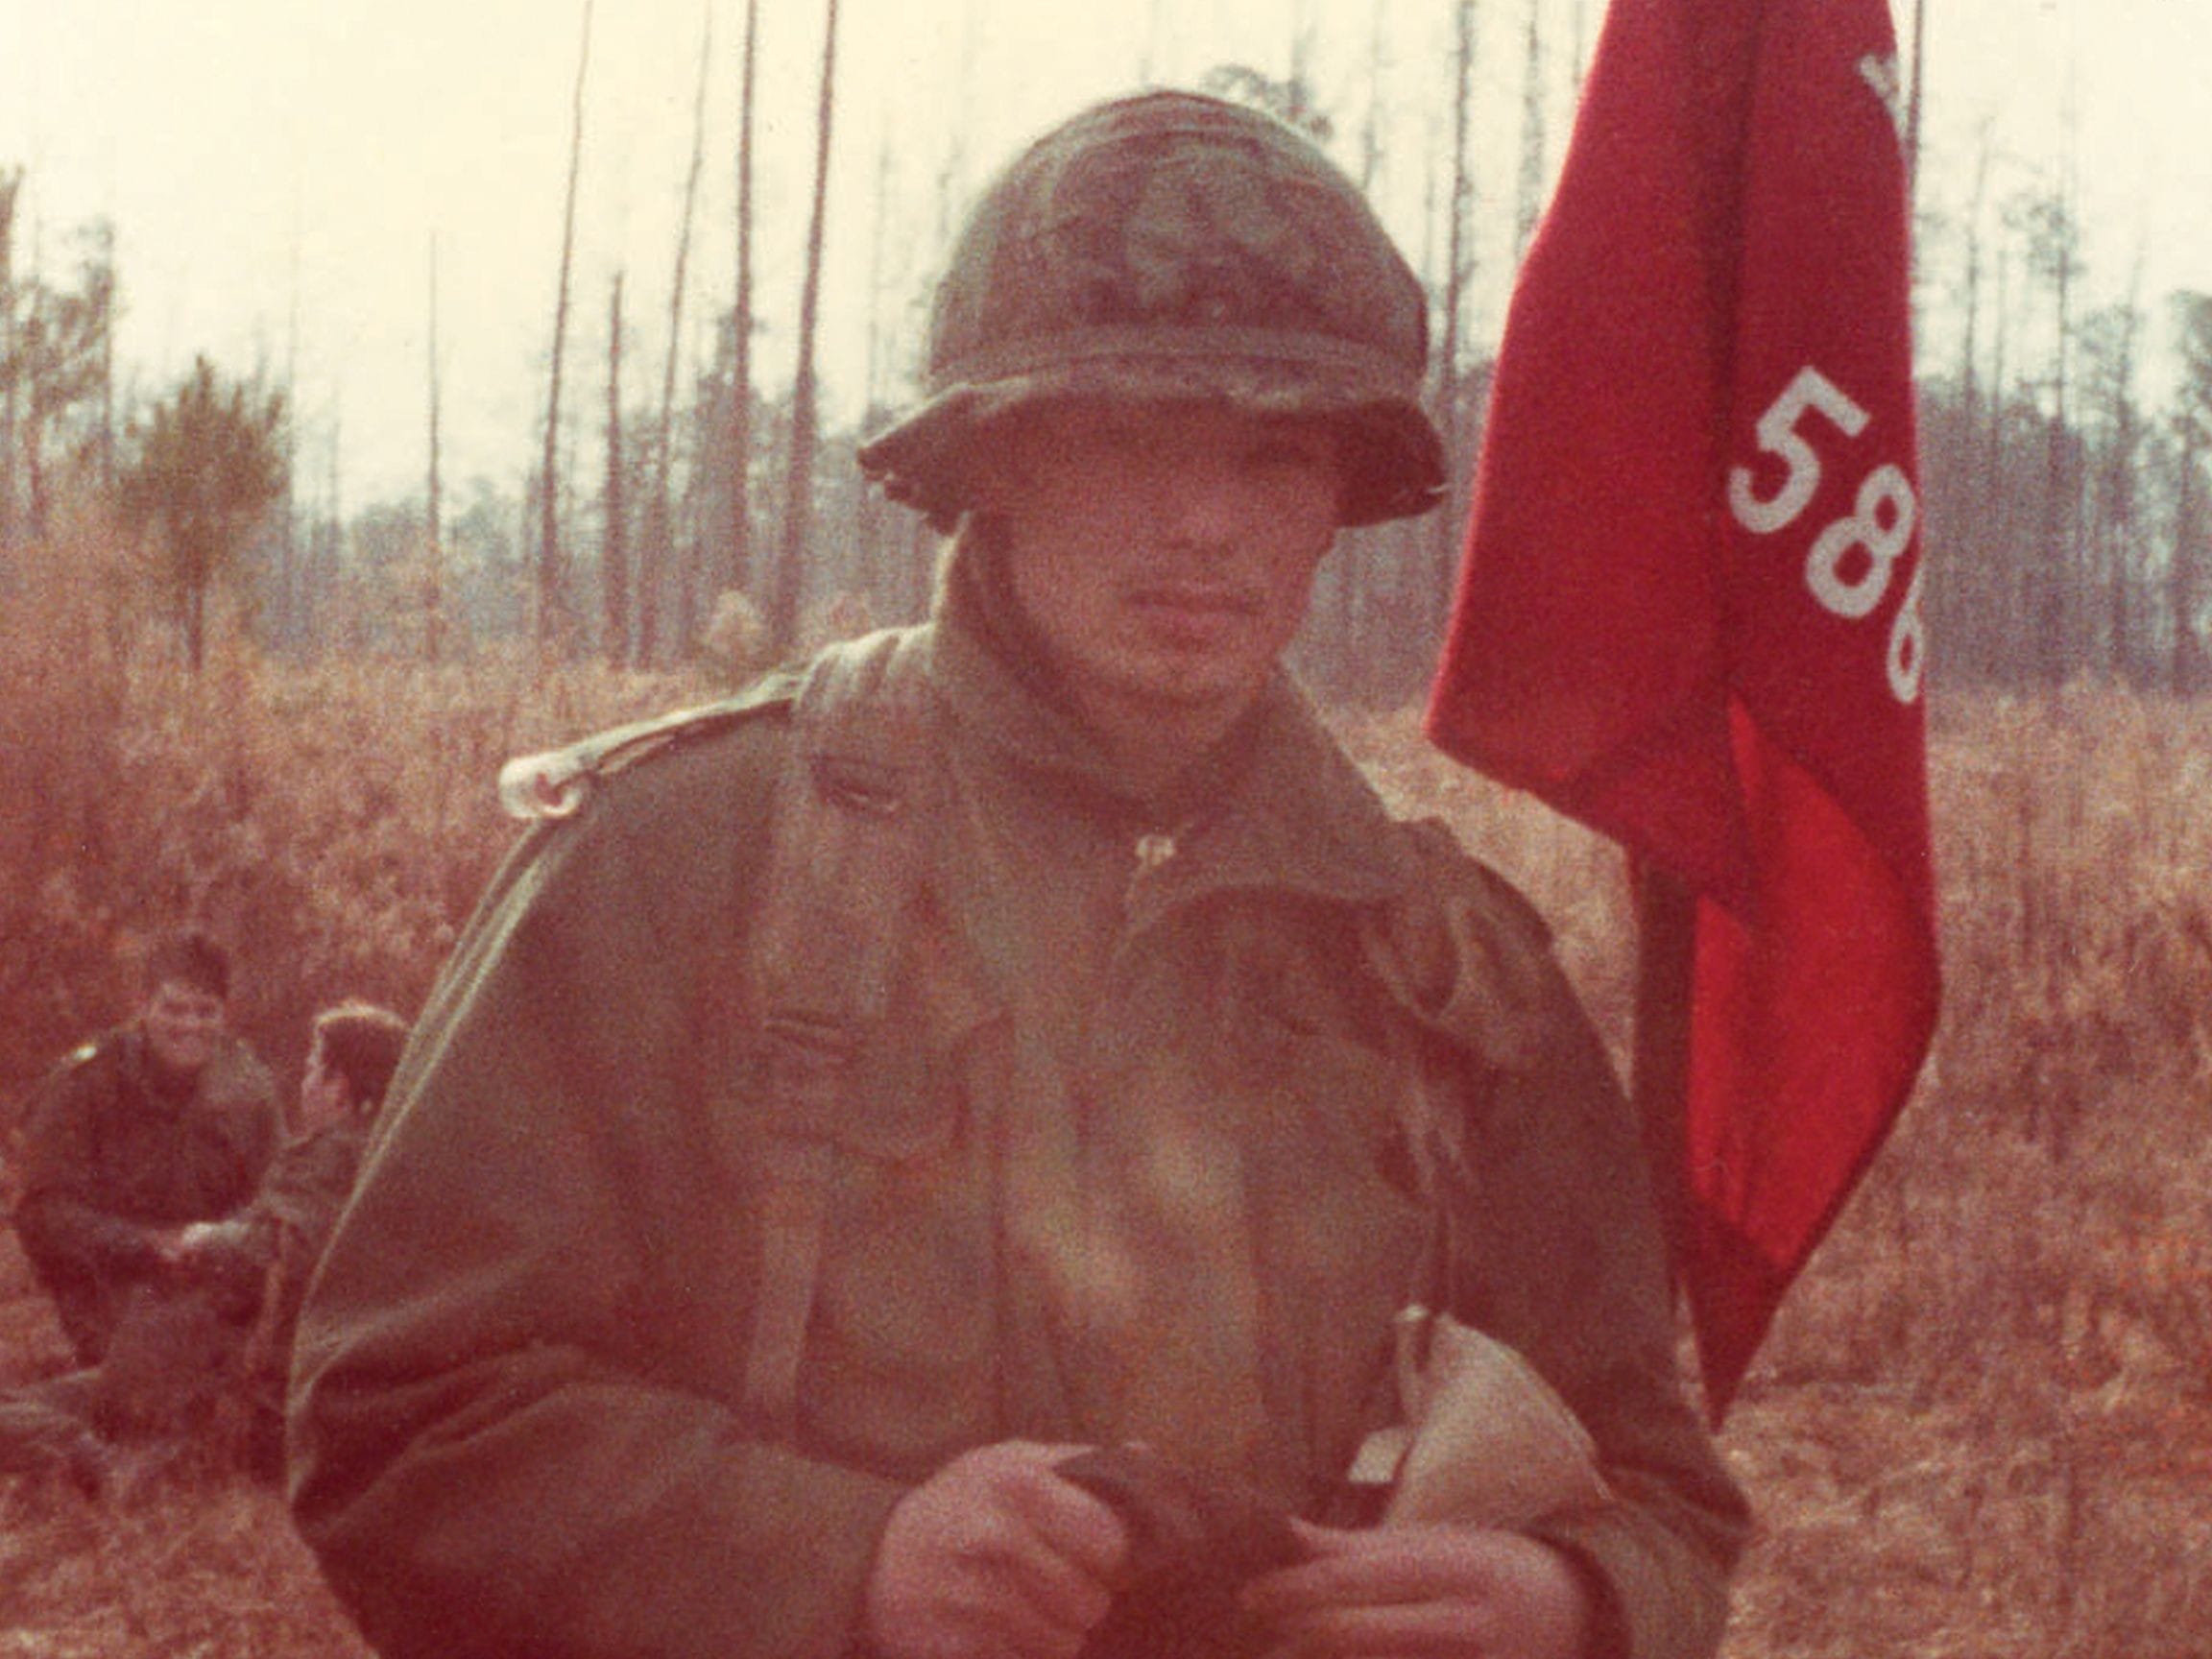 Straight out of high school Jim joined the United States Army. This photo was taken during "war games" at Fort Benning, Georgia when he was in a combat unit.